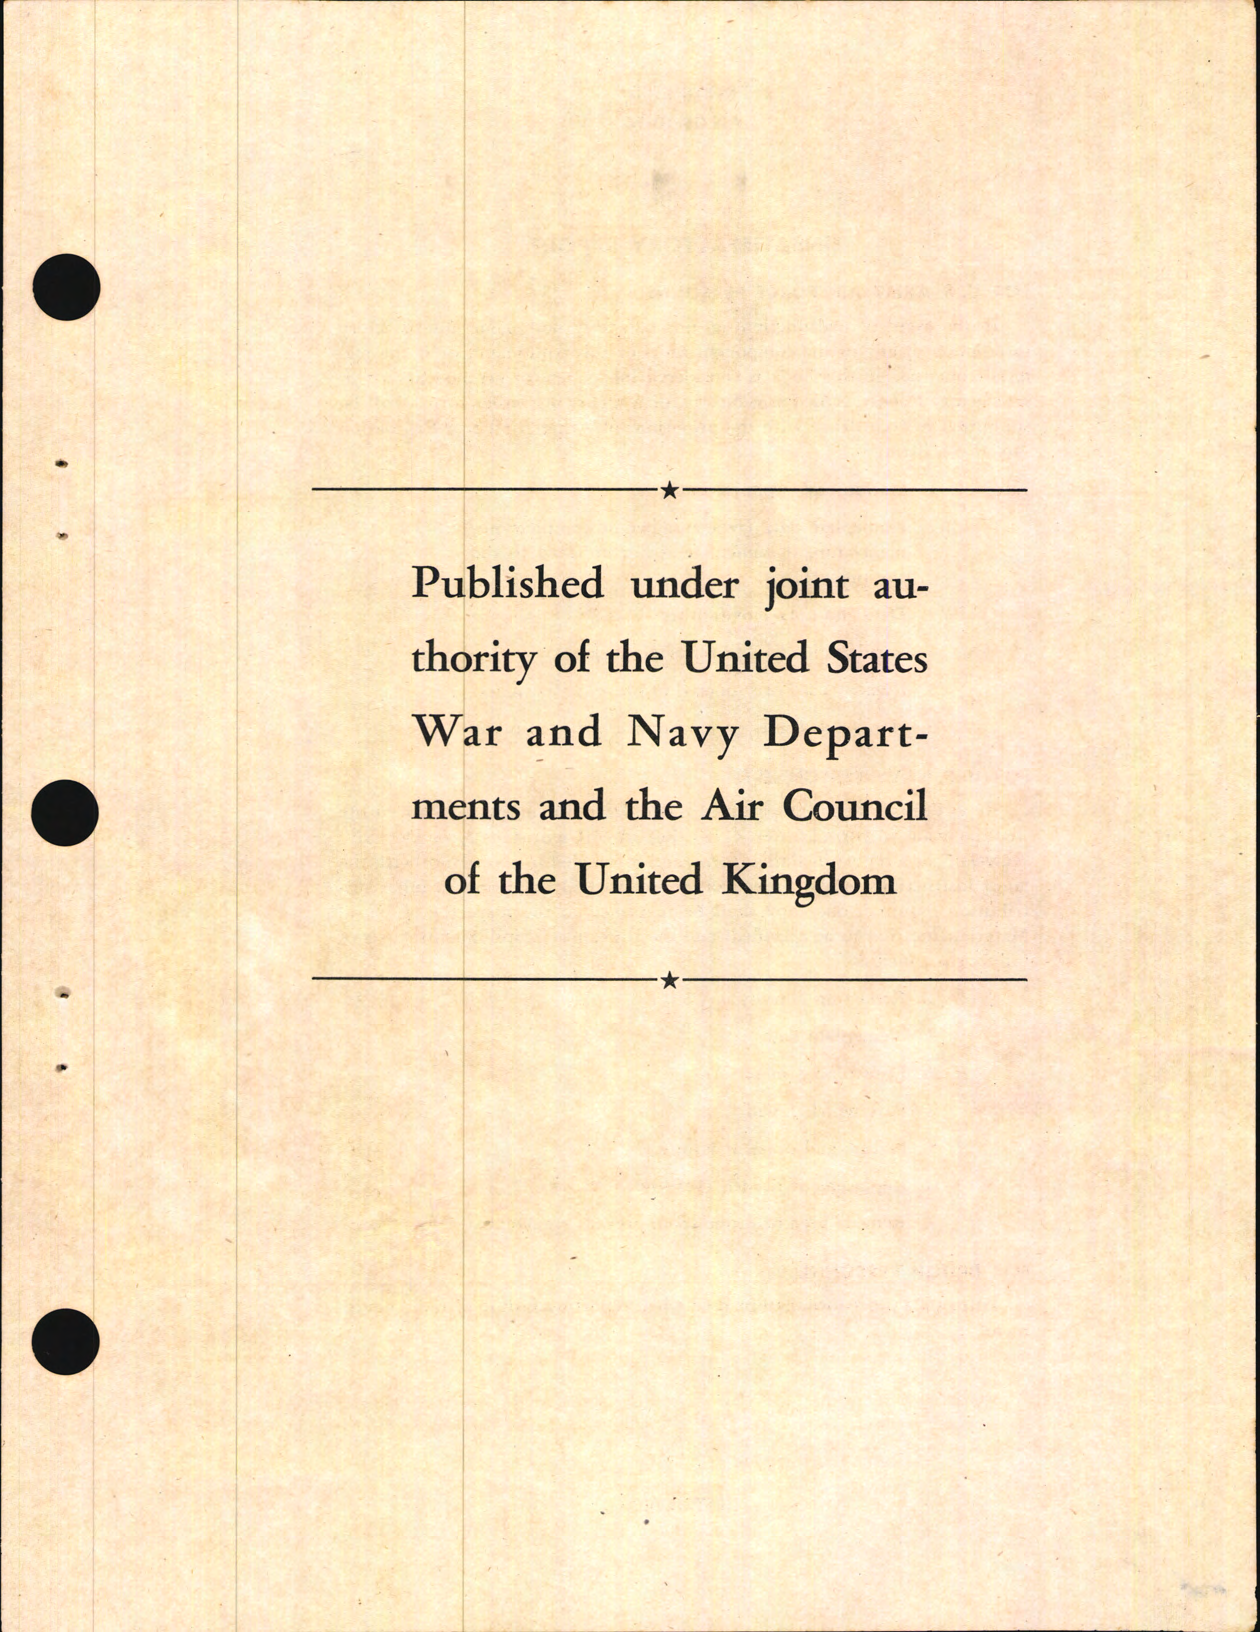 Sample page 5 from AirCorps Library document: Maintenance Instructions for Radio Set SCR-578-A or SCR-578-B